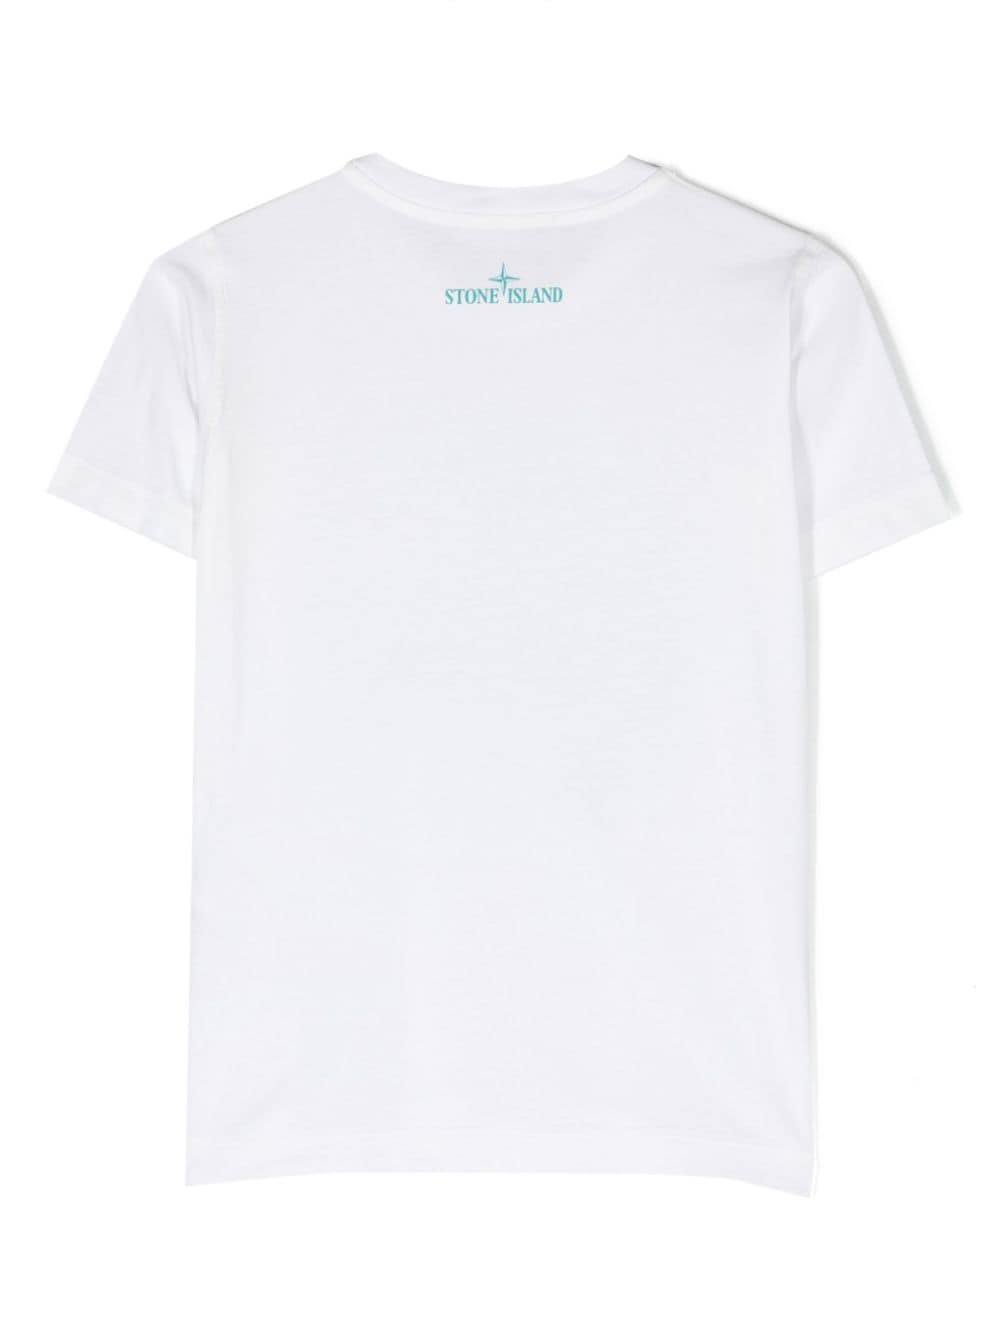 T-shirt con stampa Compass